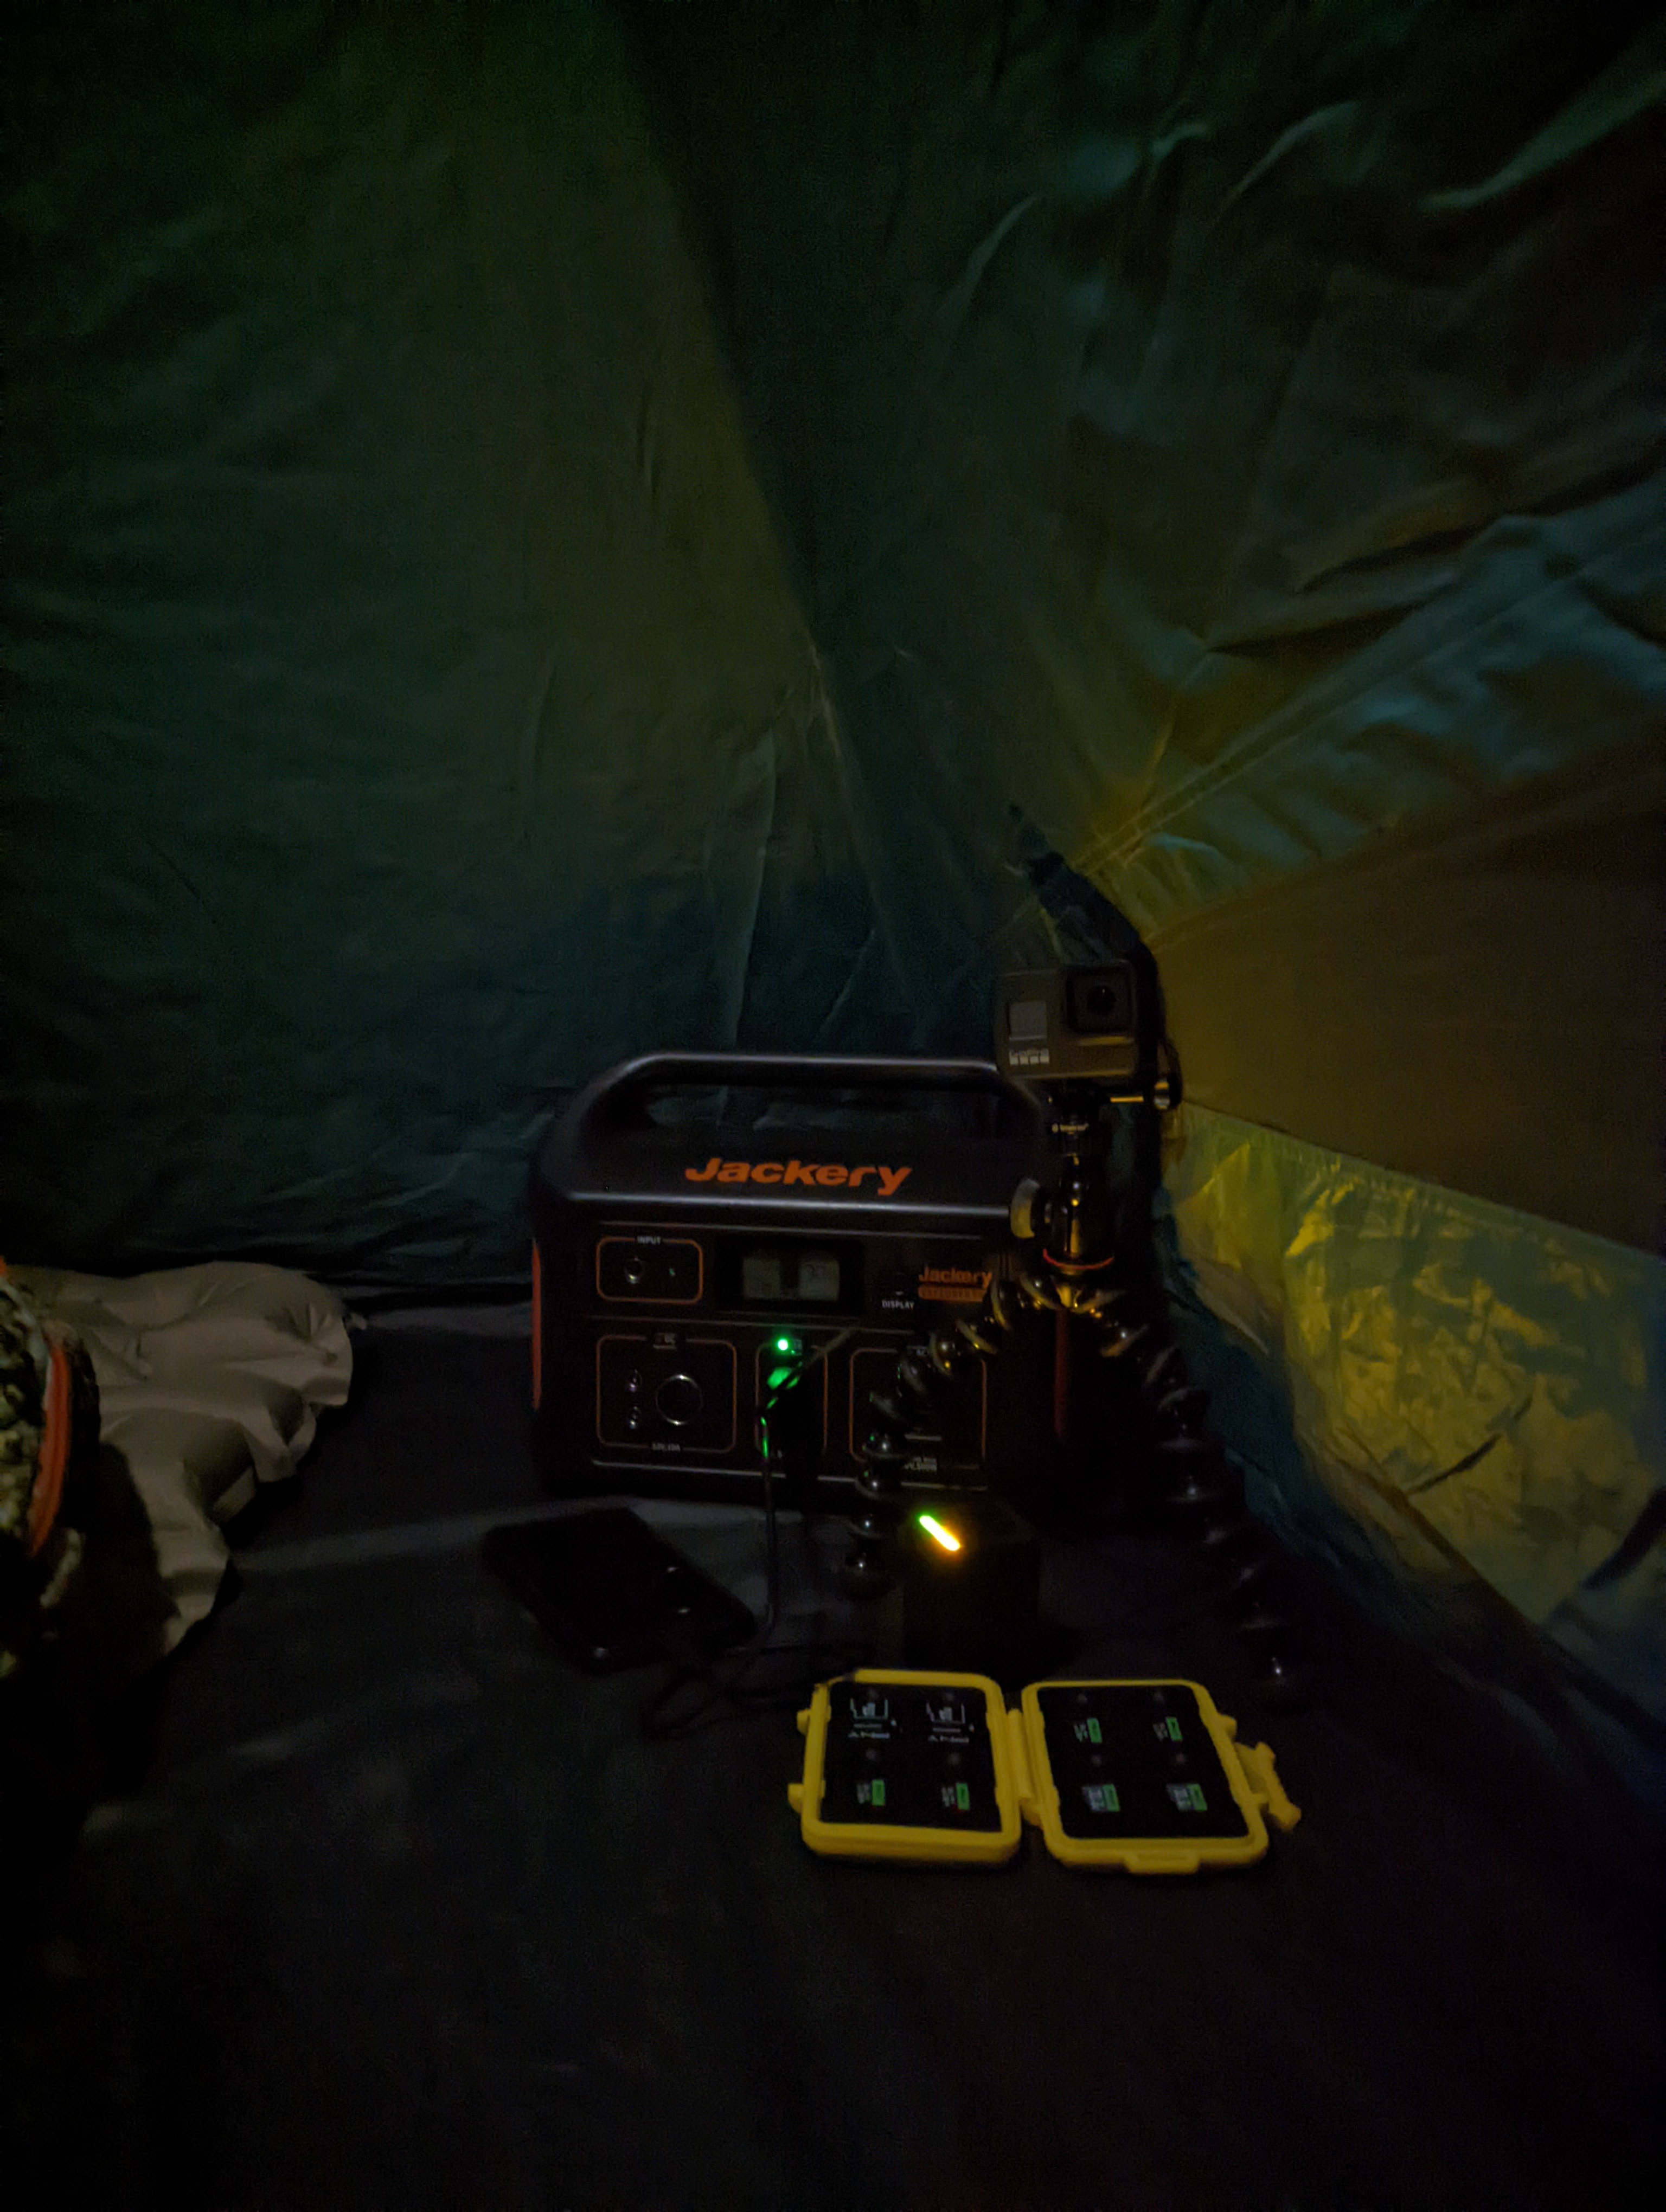 Tent charging for GoPro and phone at night from the Jackery Explorer 500.